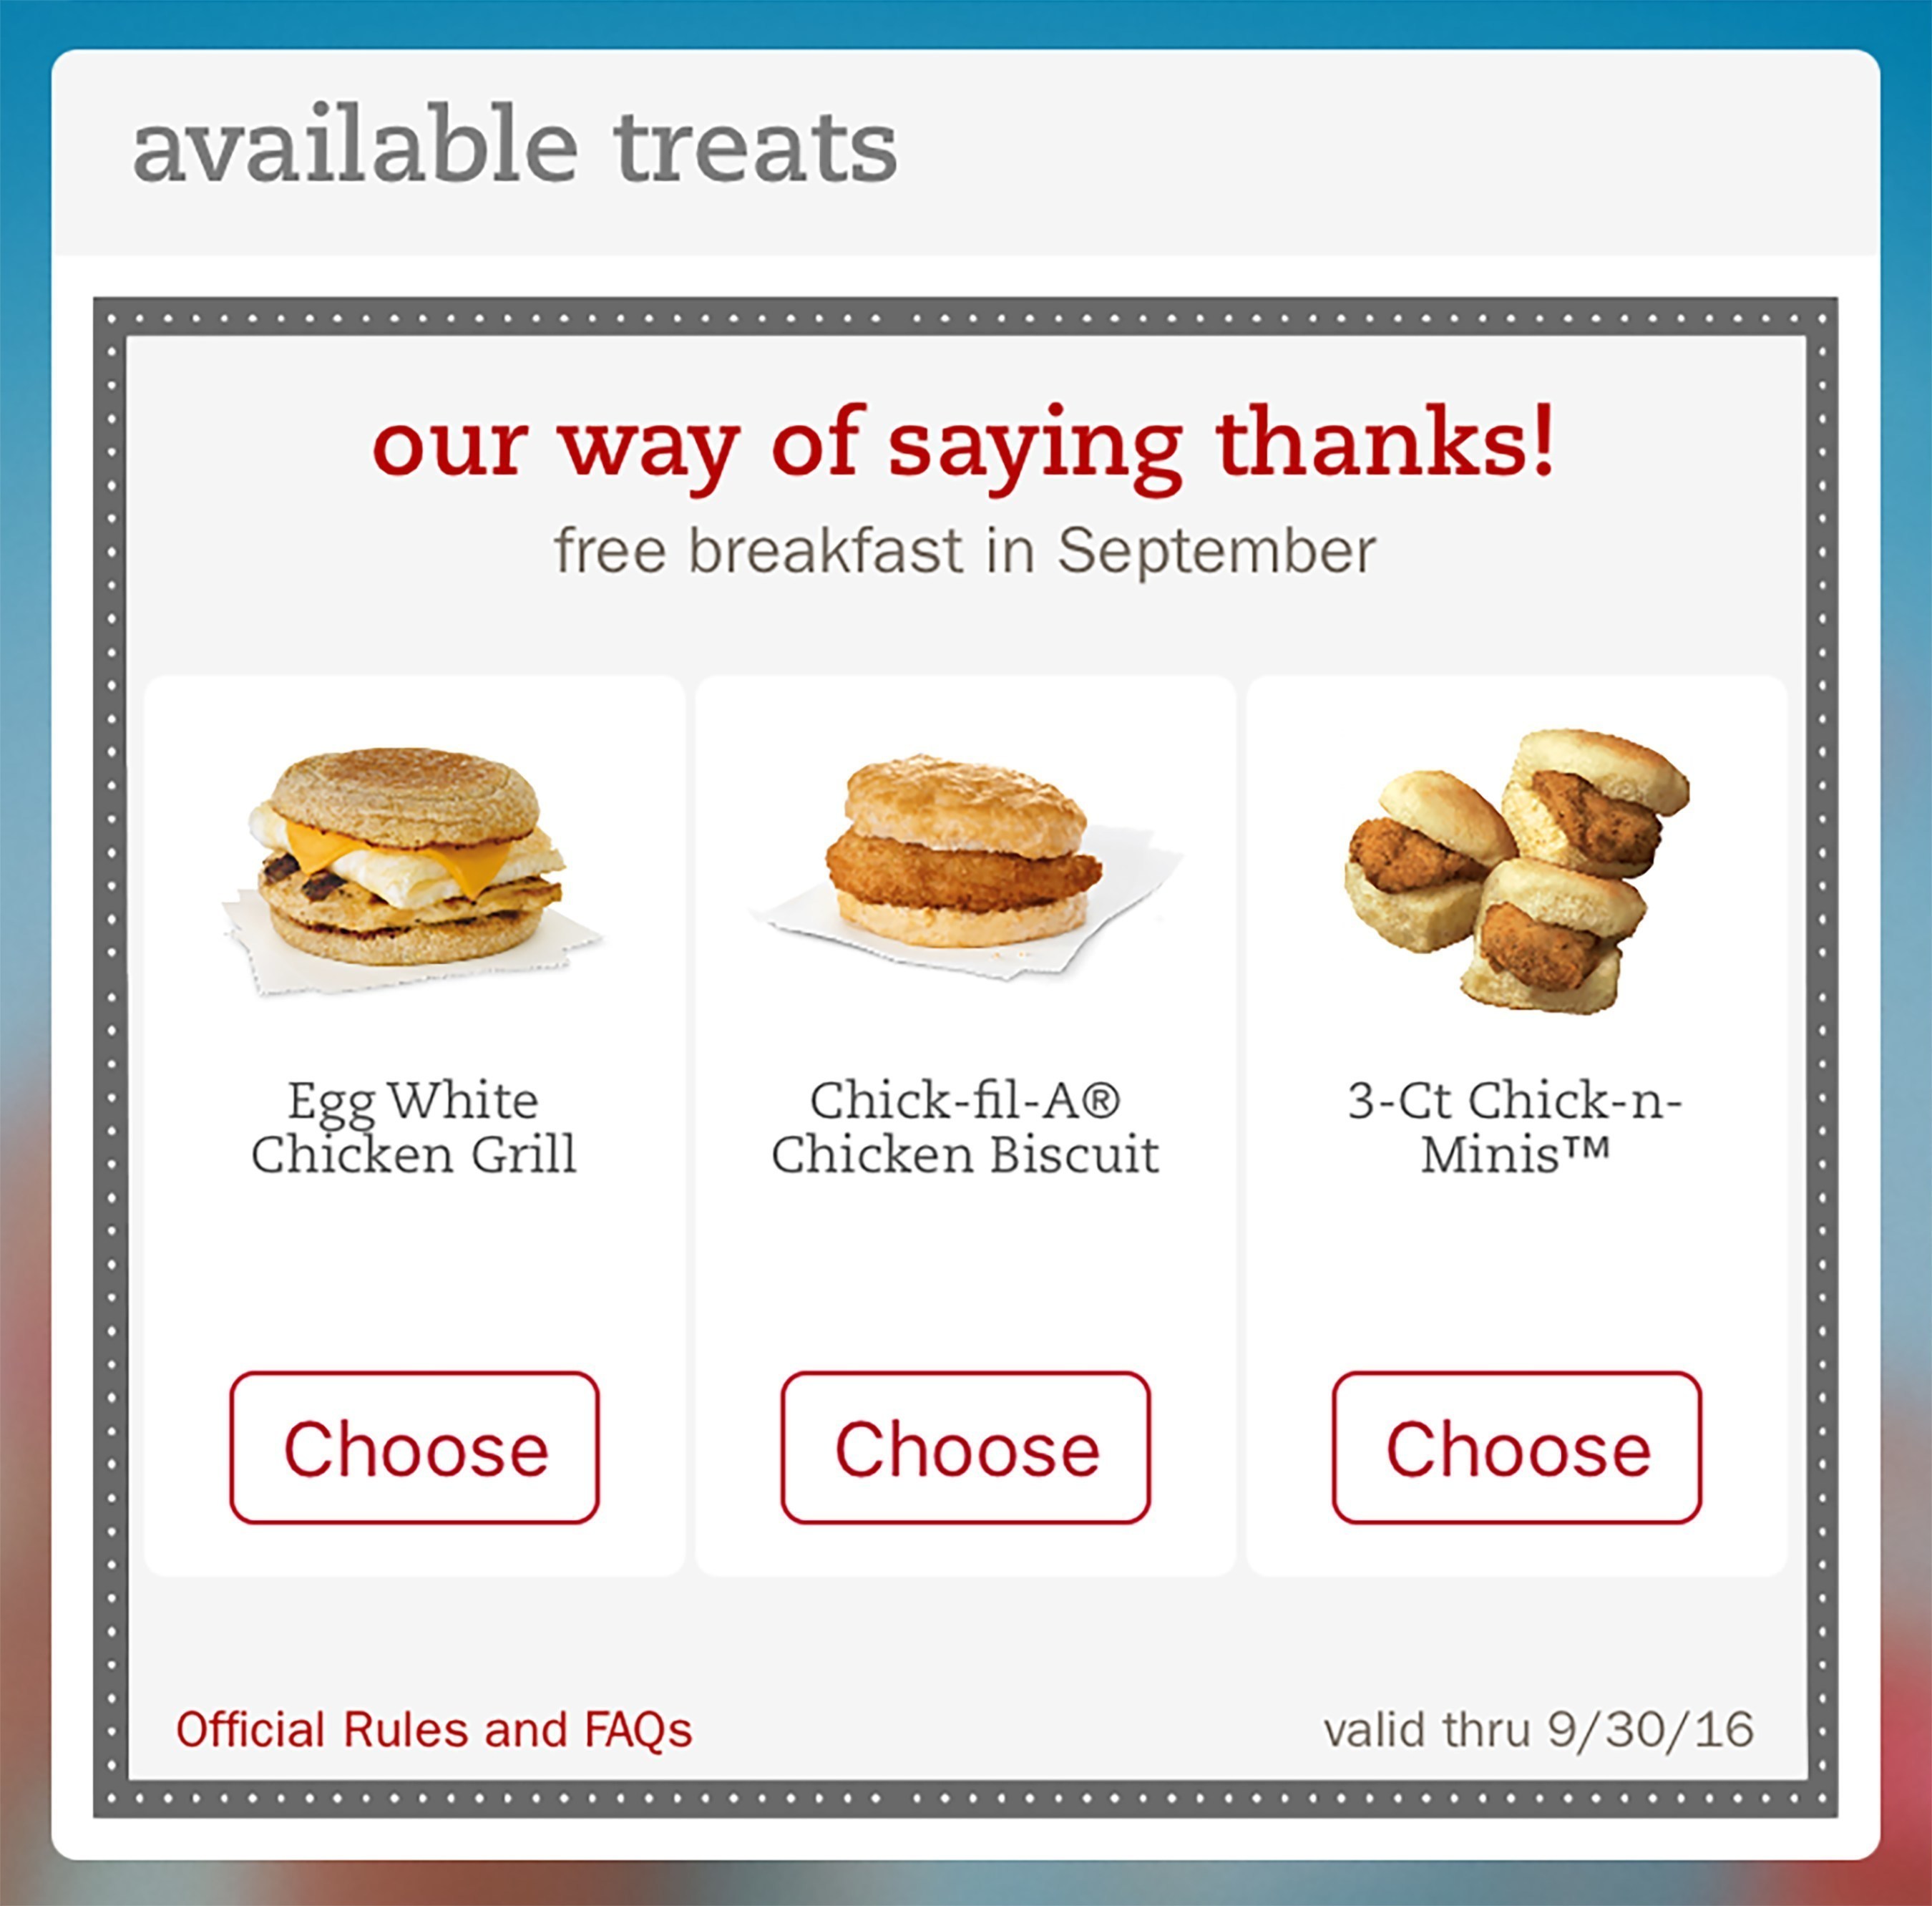 ChickfilA Offers Free Breakfast Item for "ChickfilA One" App Users